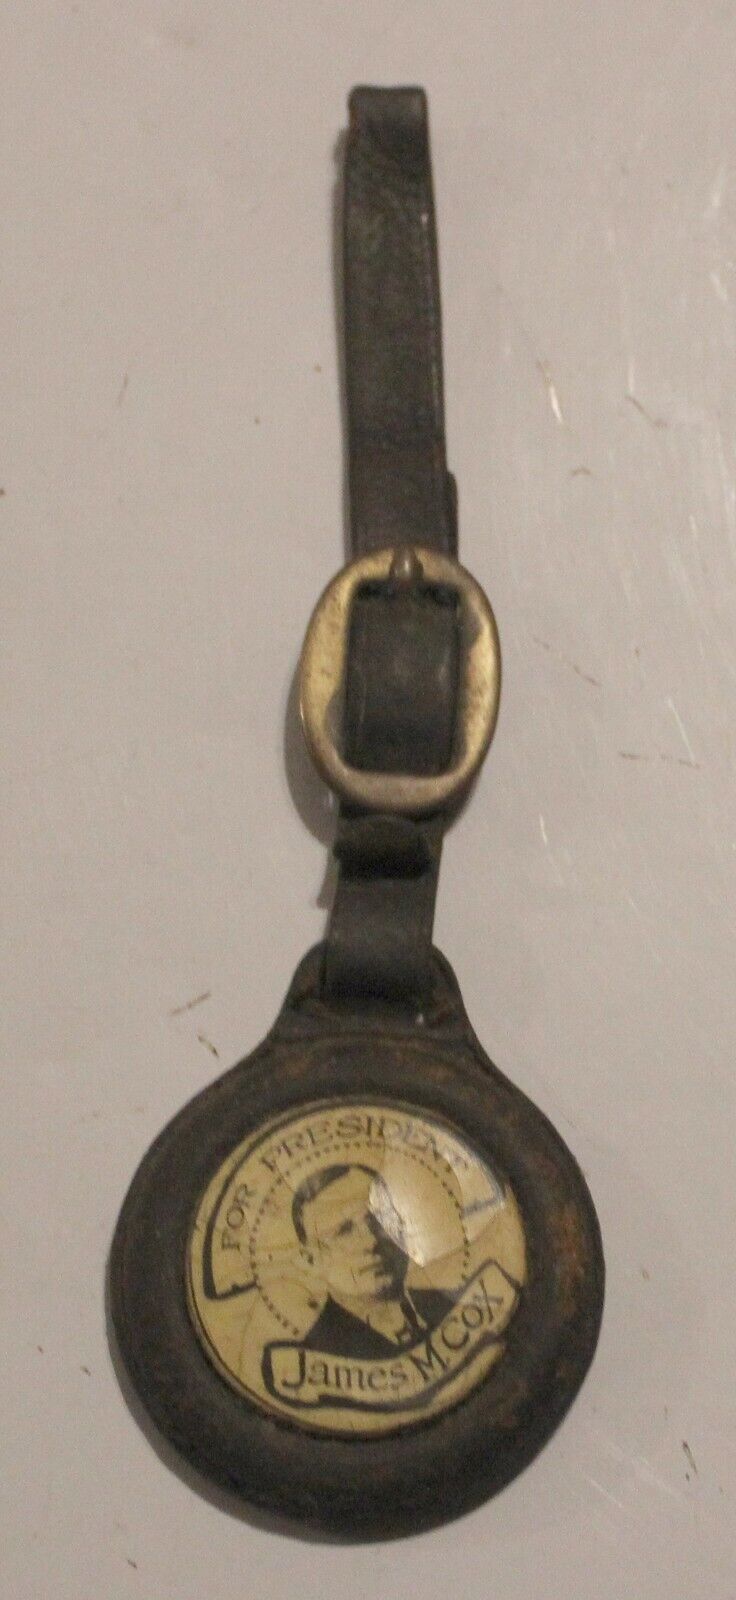 James M Cox for President Real Photo Watch Fob Button Leather Rare Antique